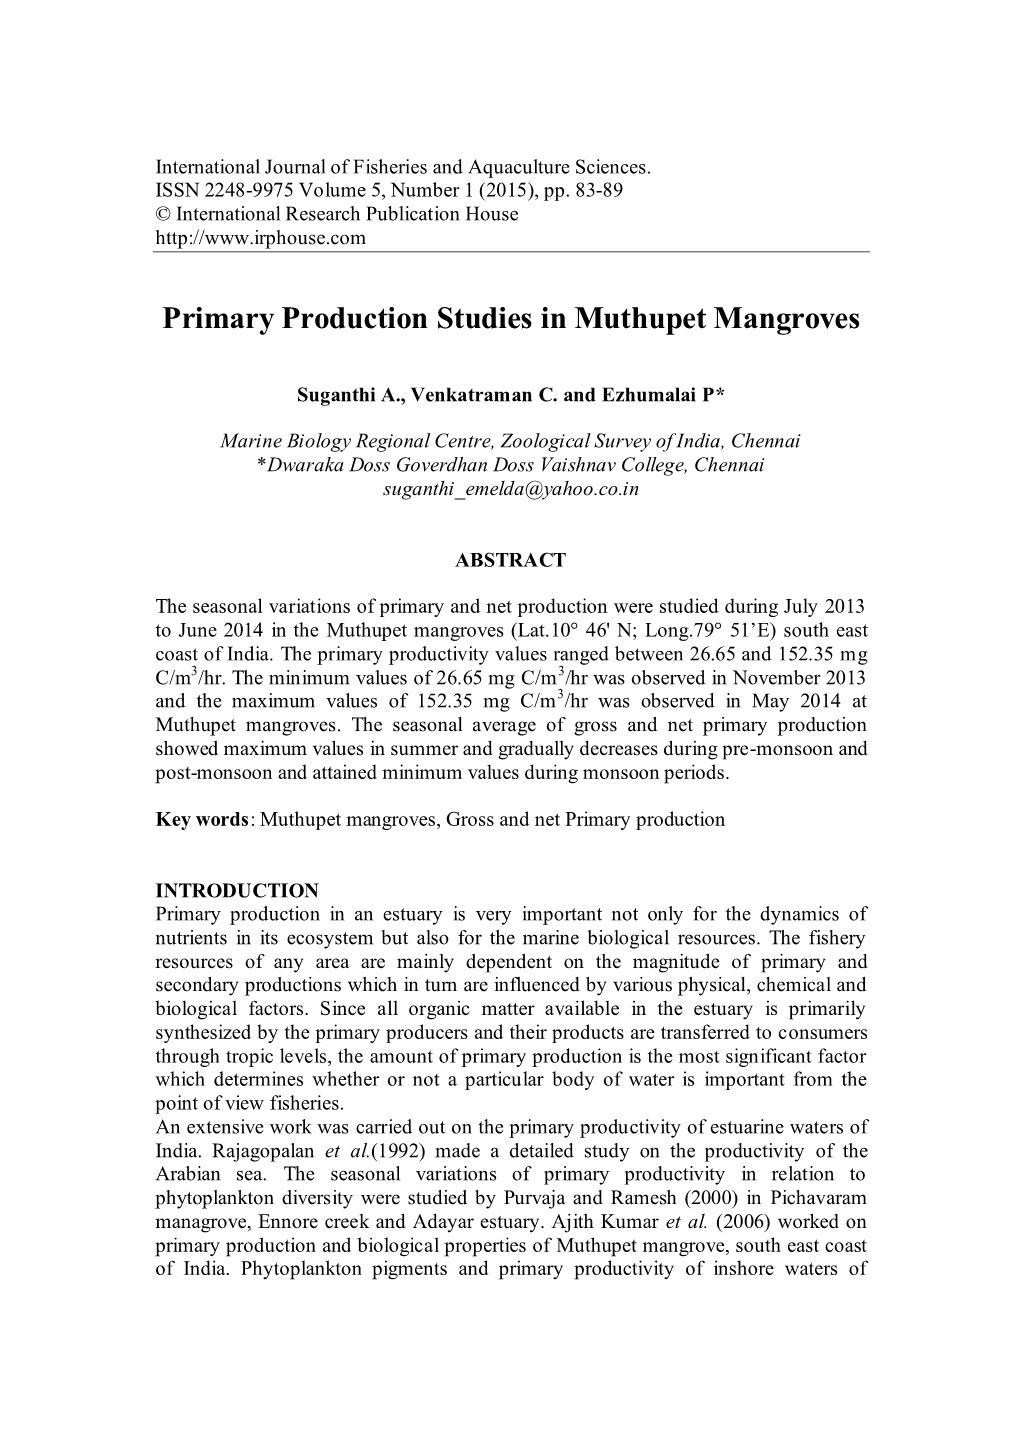 Primary Production Studies in Muthupet Mangroves